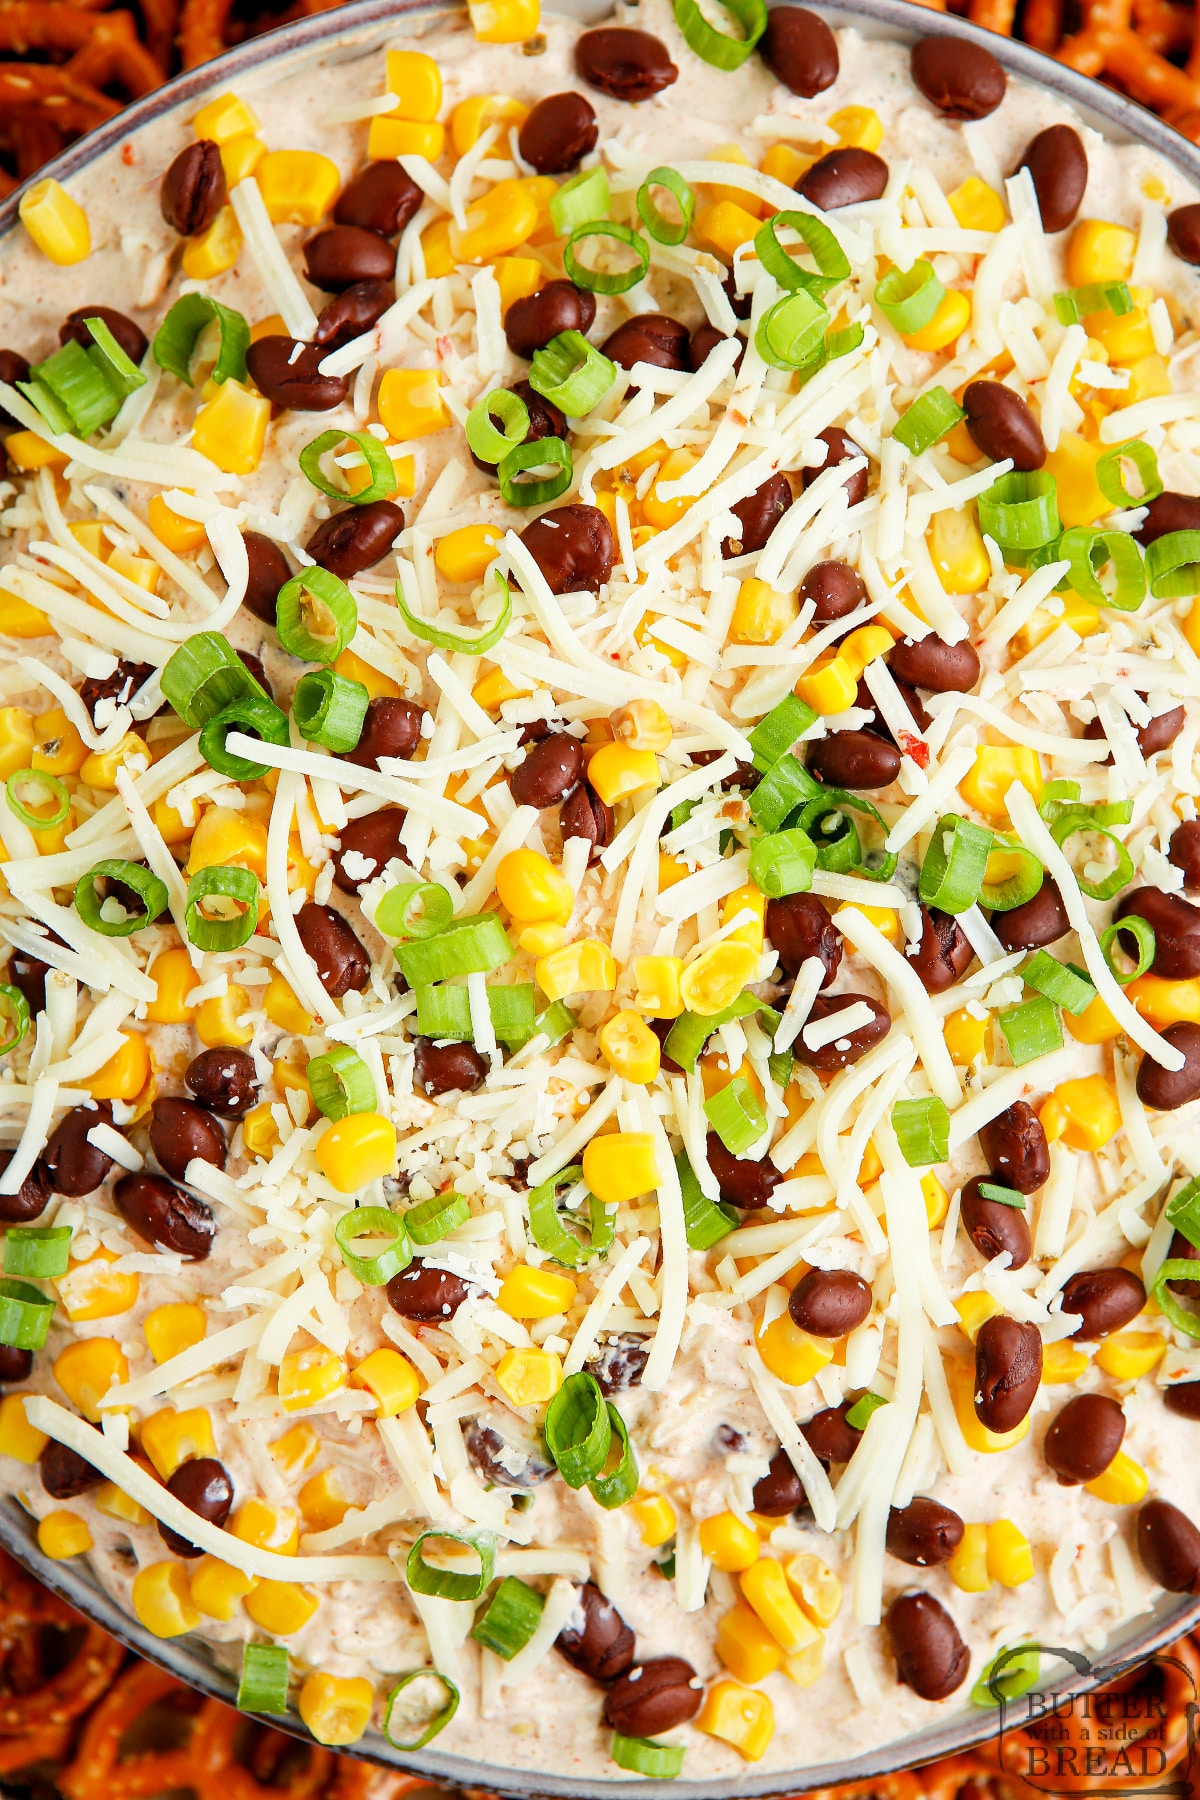 Chip dip made with cream cheese, sour cream, cheese, black beans and corn